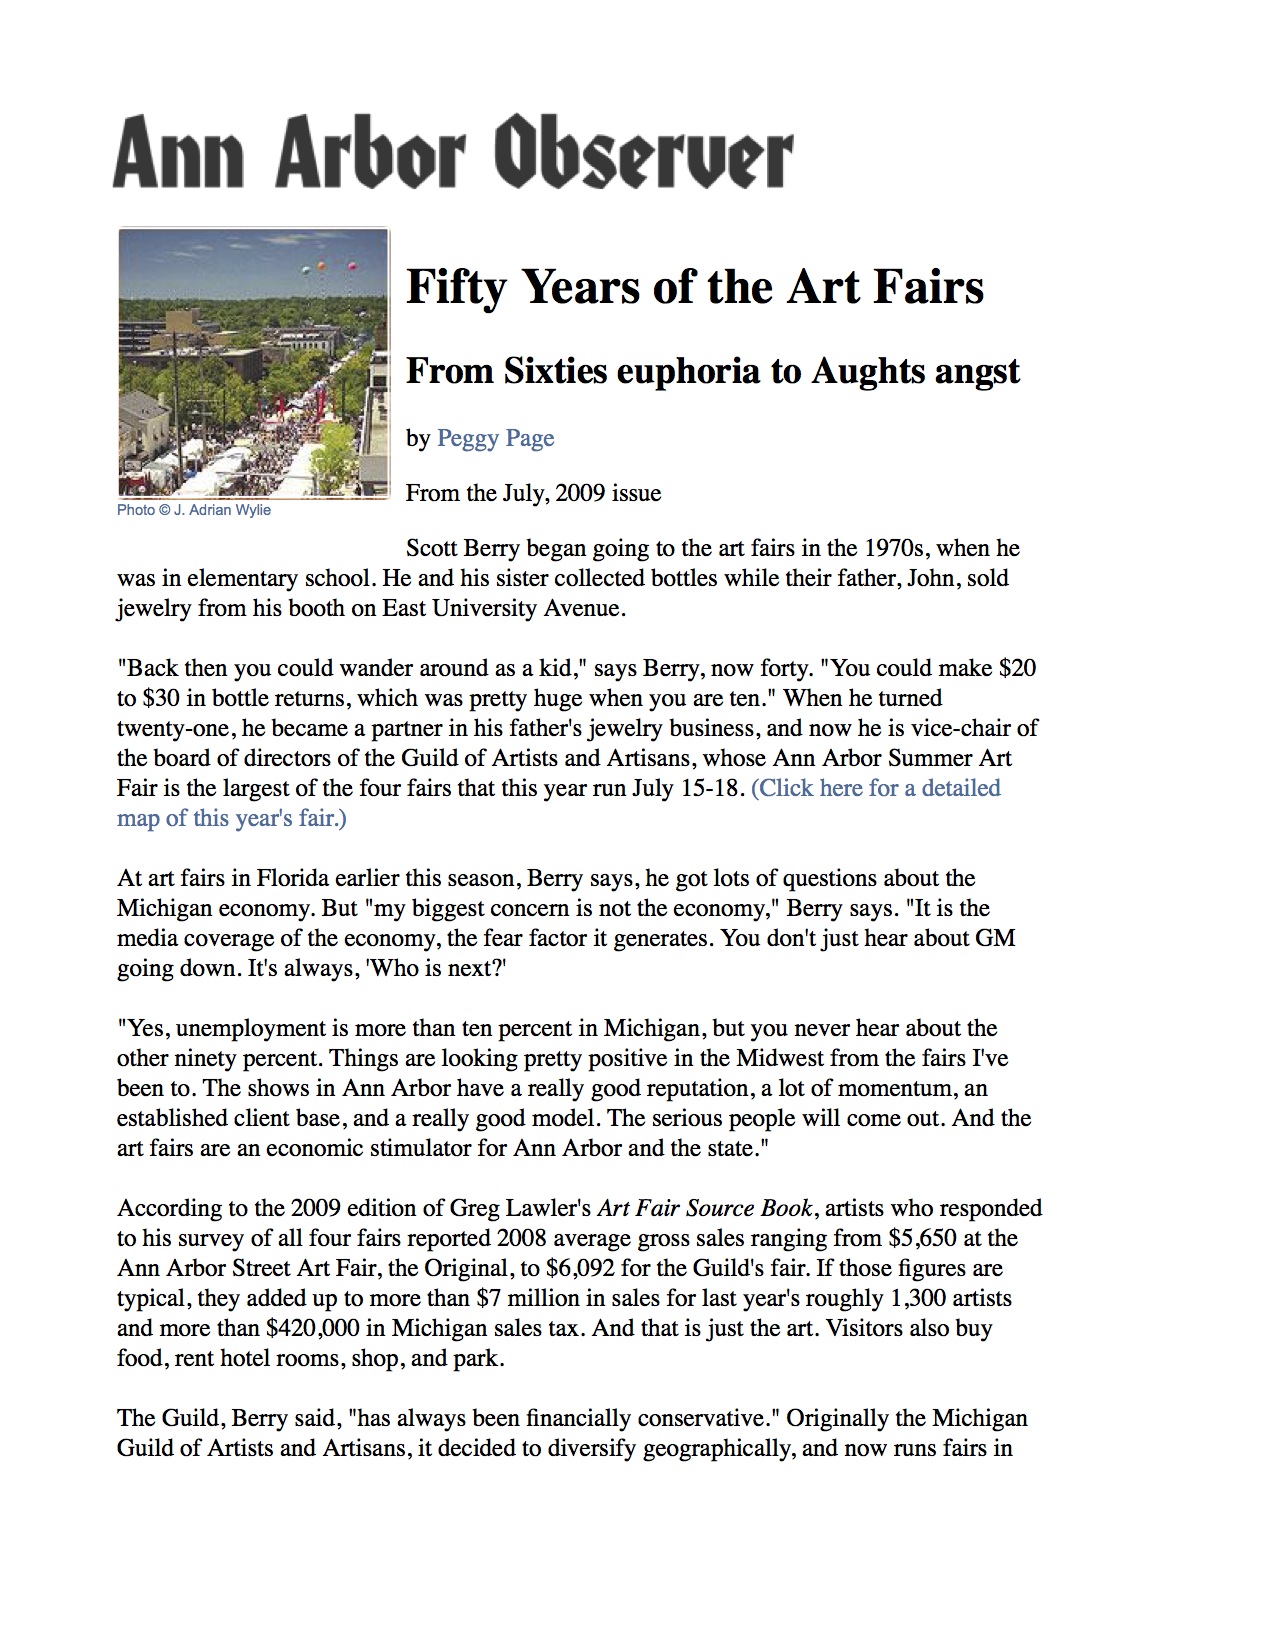 Page, Peggy. "Fifty Years of the Art Fairs From Sixties euphoria to Aughts angst." Ann Arbor Observer 14 July 2009. Print.